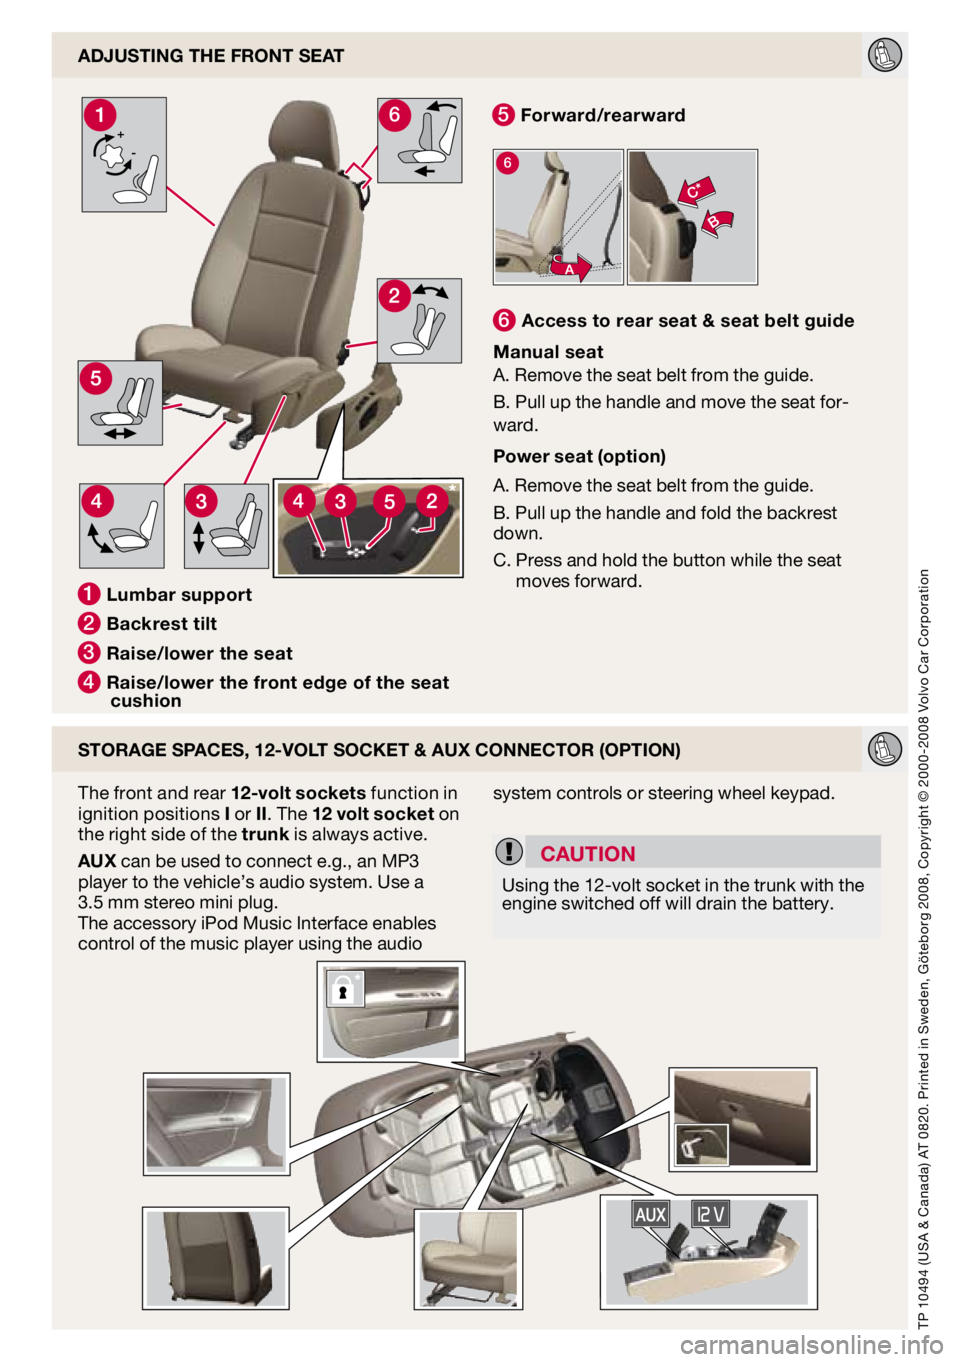 VOLVO C70 CONVERTIBLE 2009  Quick Guide 
+-
6

6

AdjUSTIng The FROnT SeAT
STORAge SPAceS, 12-vOlT SOckeT & AUX cOnnecTOR (OPTIOn)
The front and rear 12-volt sockets function in ignition positions I or II. The 12 volt socket on the right si